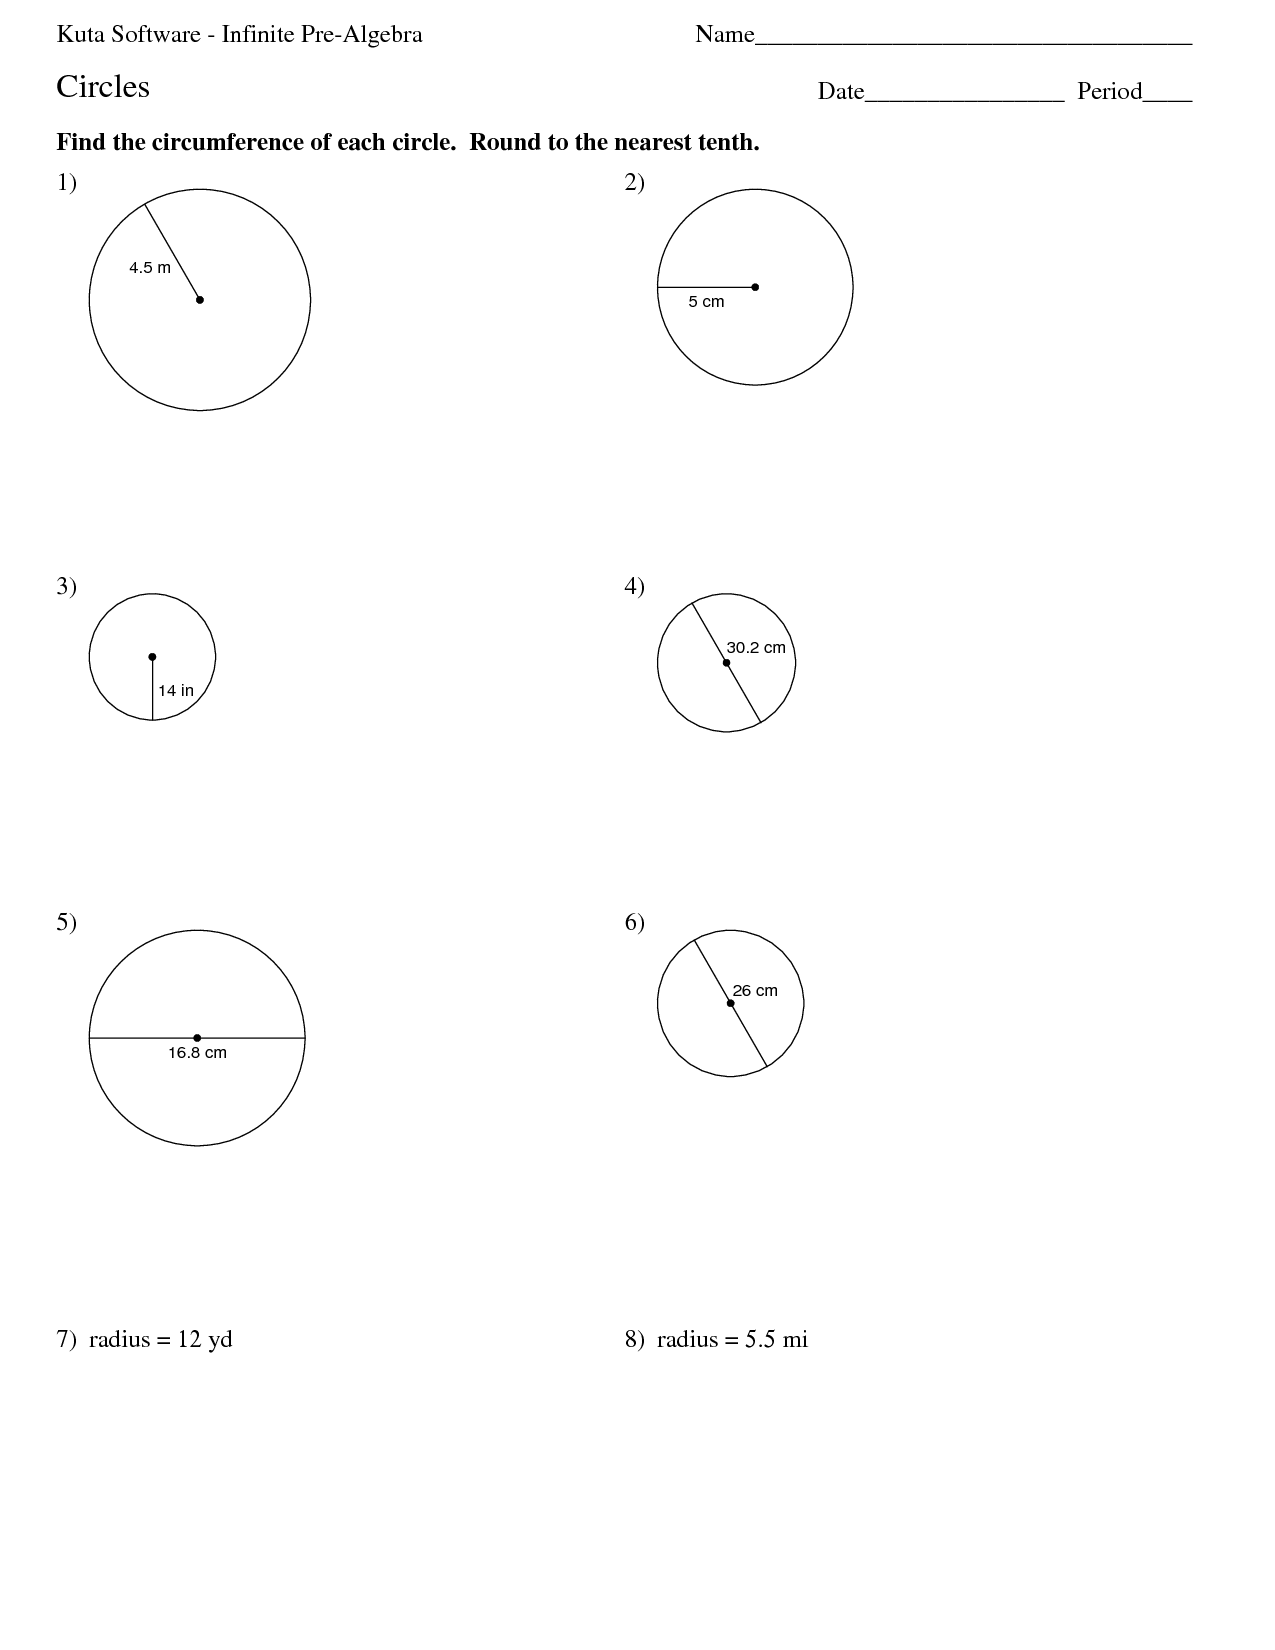 round-and-round-finding-the-circumference-of-a-circle-worksheet-teaching-printables-circle